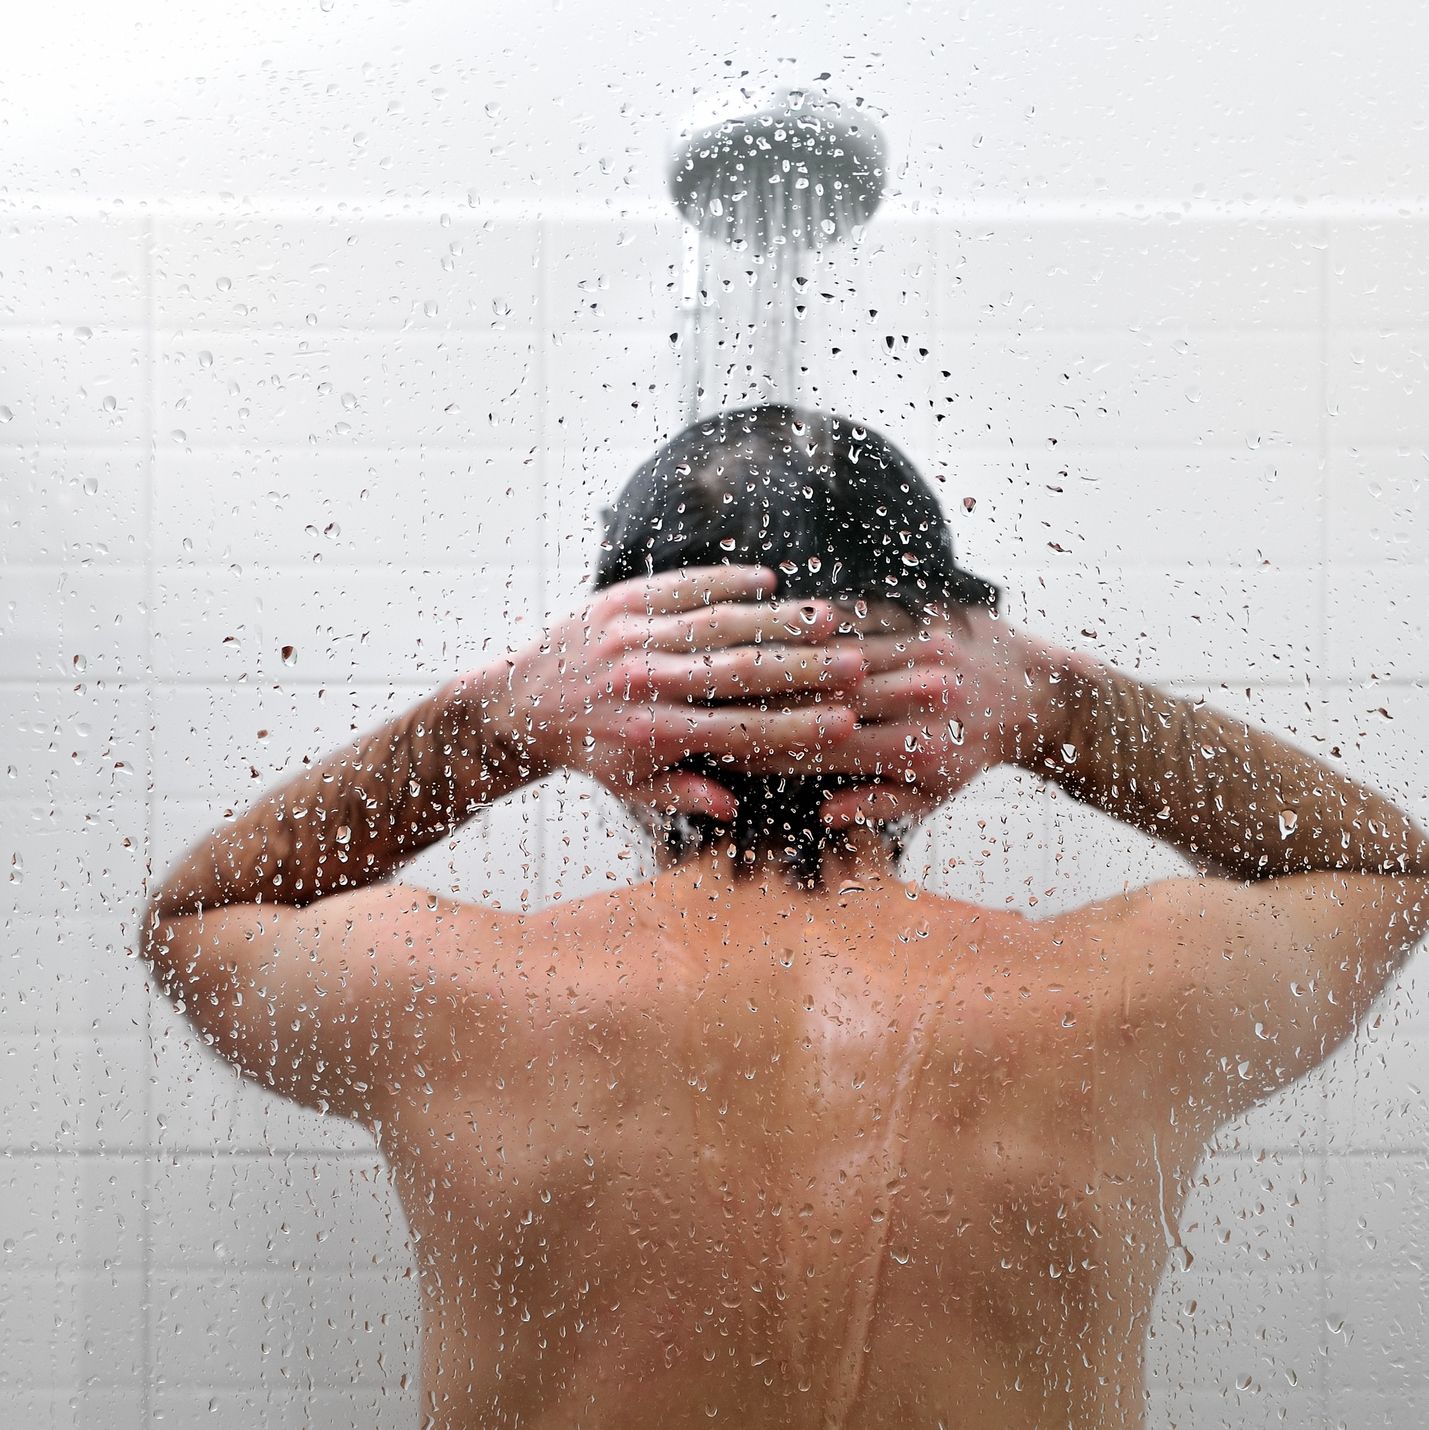 Naked man is taking a shower in bathroom, rear view